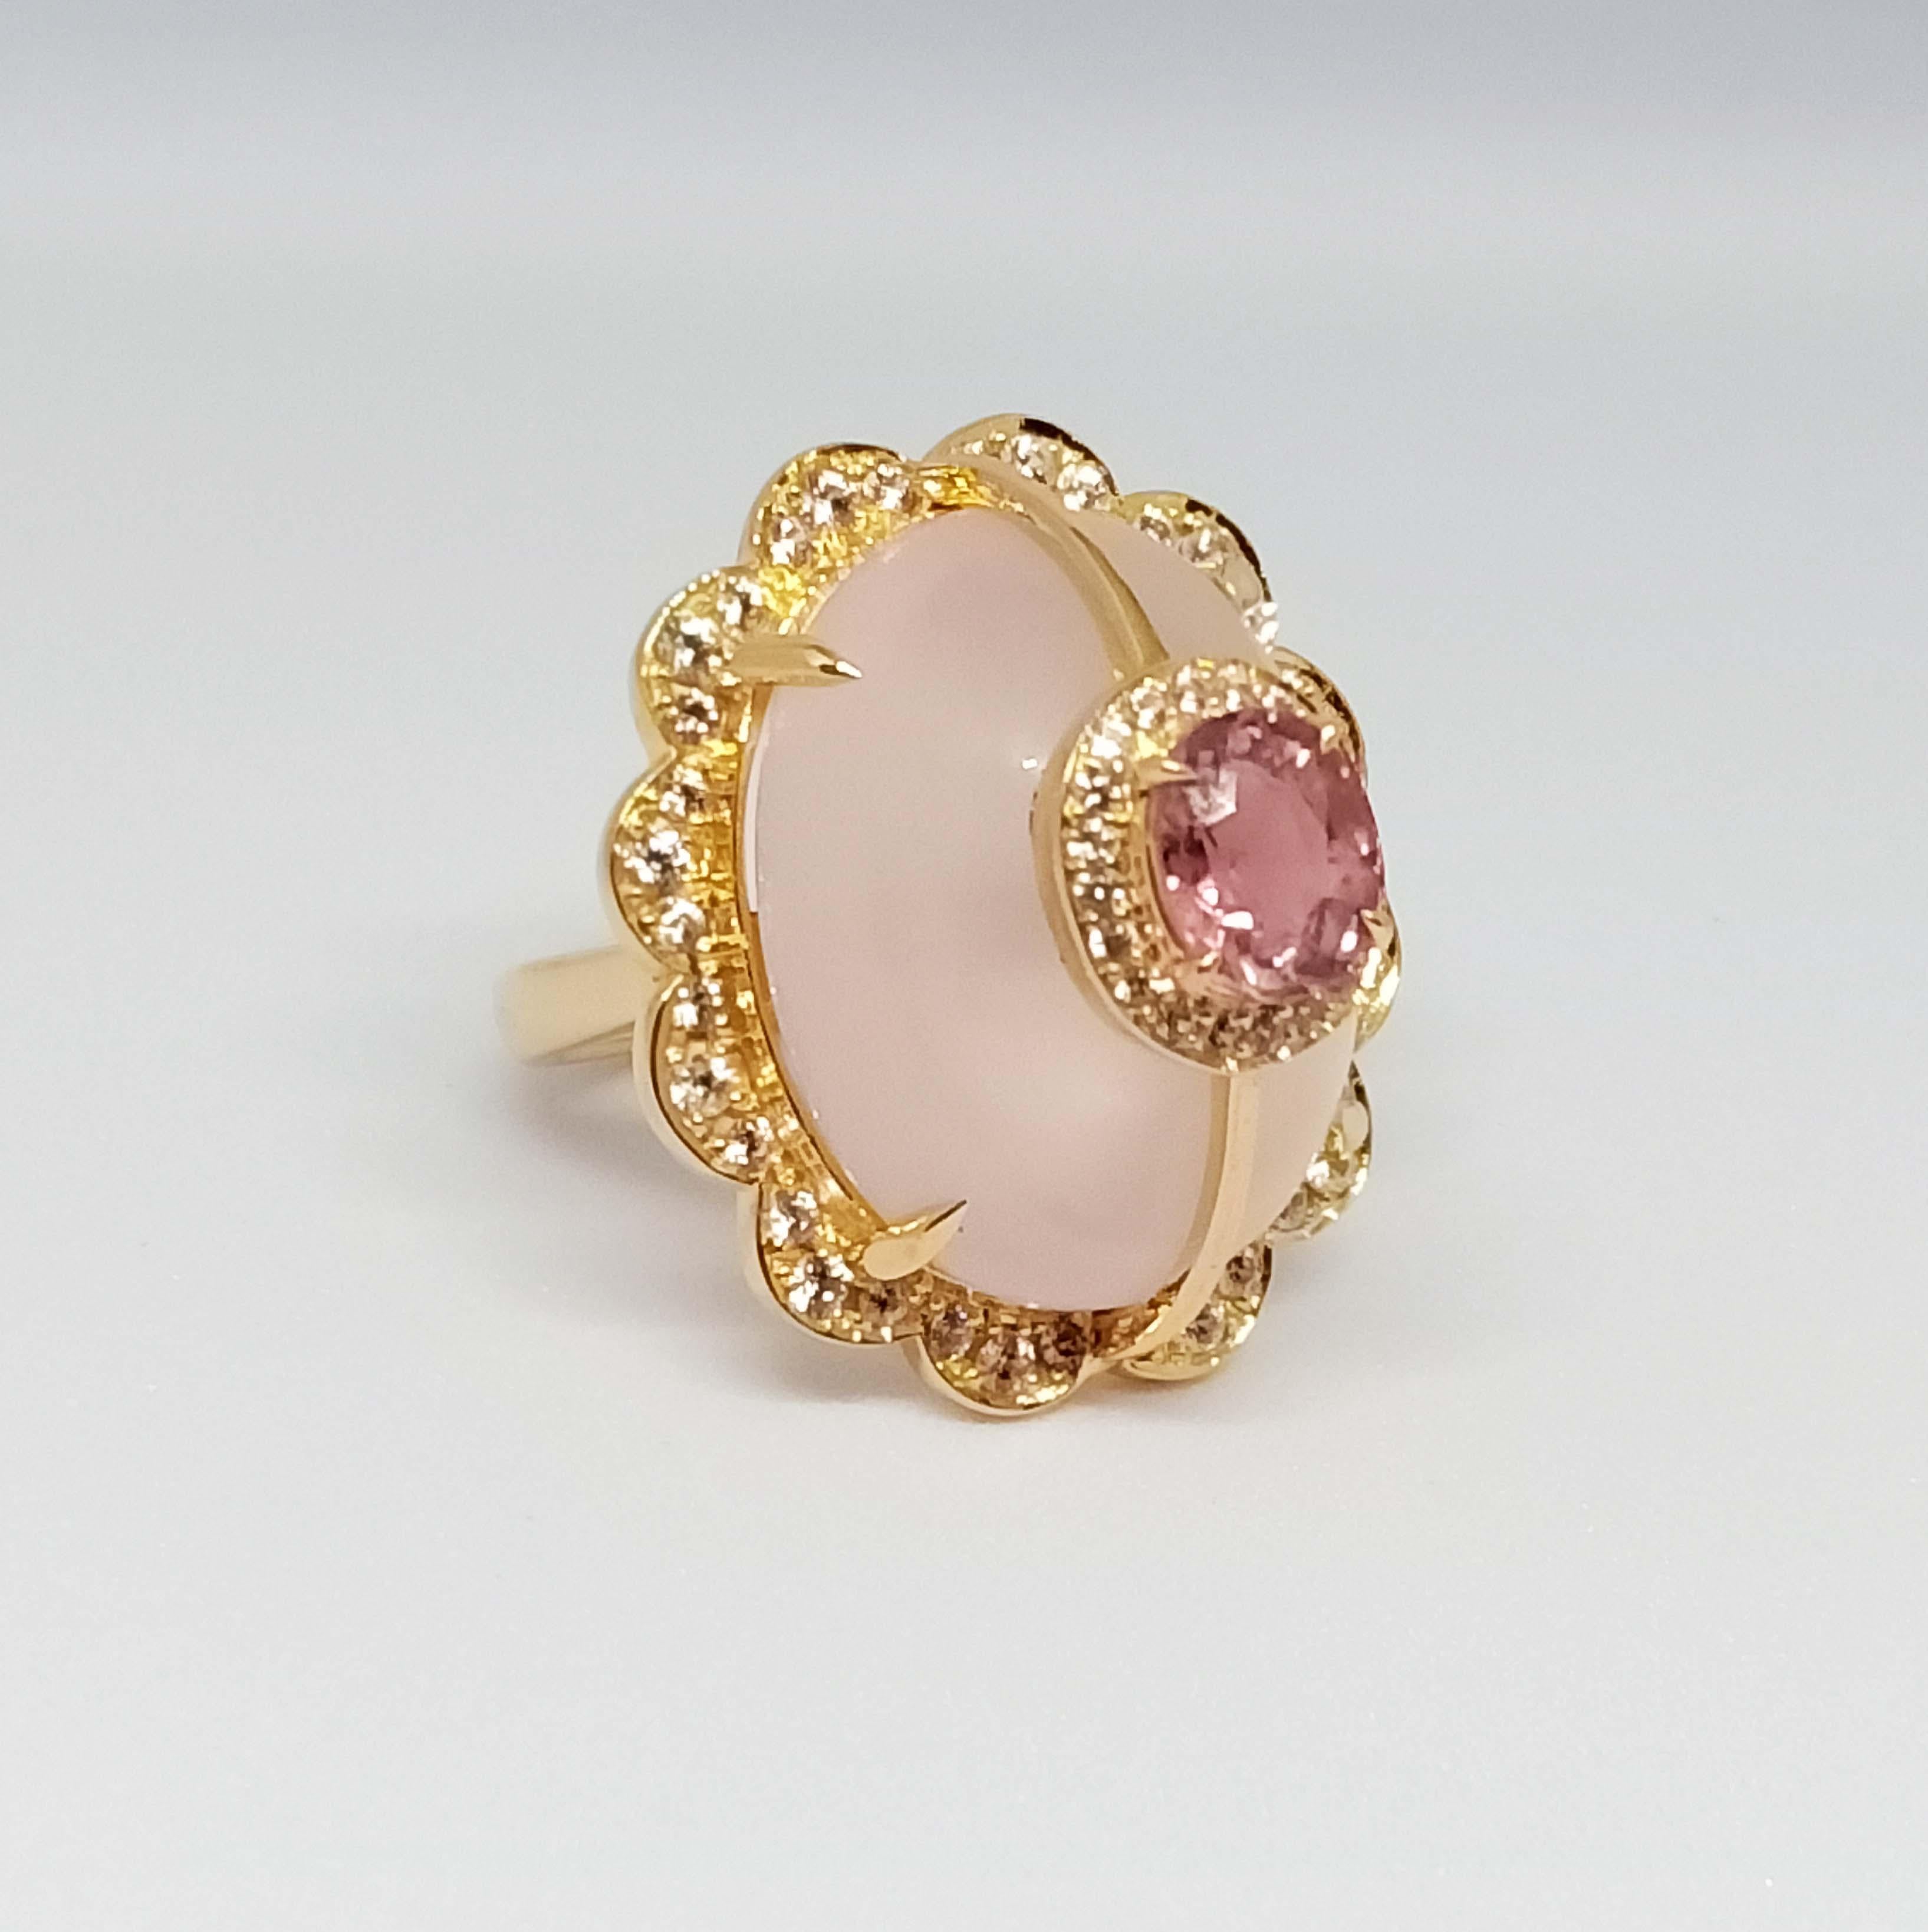 33.43 Cts. Rose Quartz Ring. Sterling Silver on 18K Gold Plated. For Sale 1